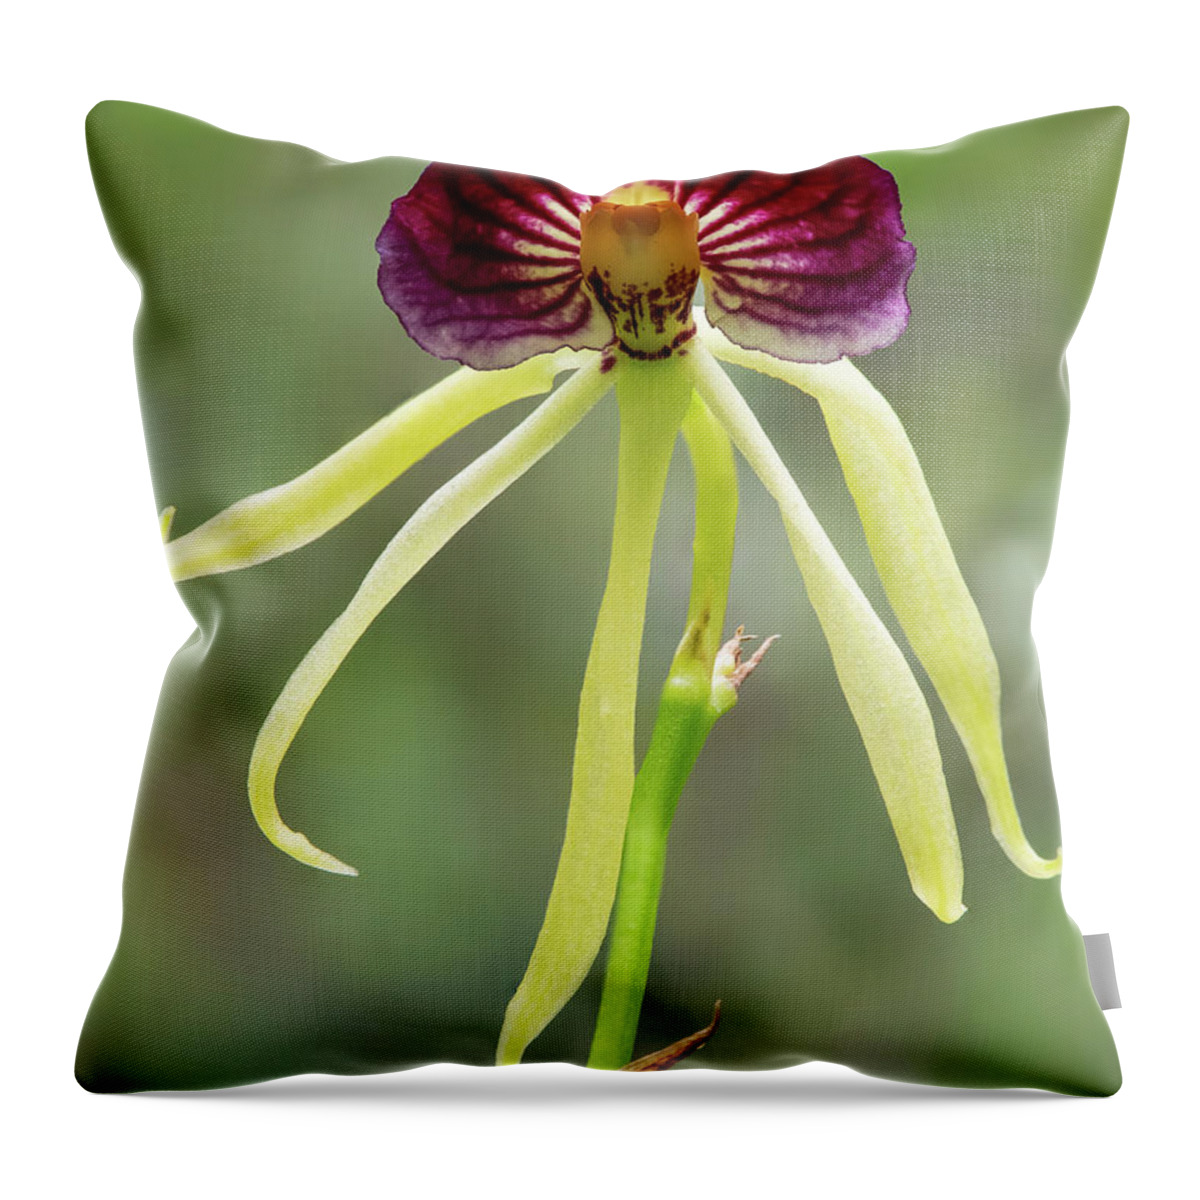 Big Cypress National Preserve Throw Pillow featuring the photograph Clamshell Orchid by Rudy Wilms